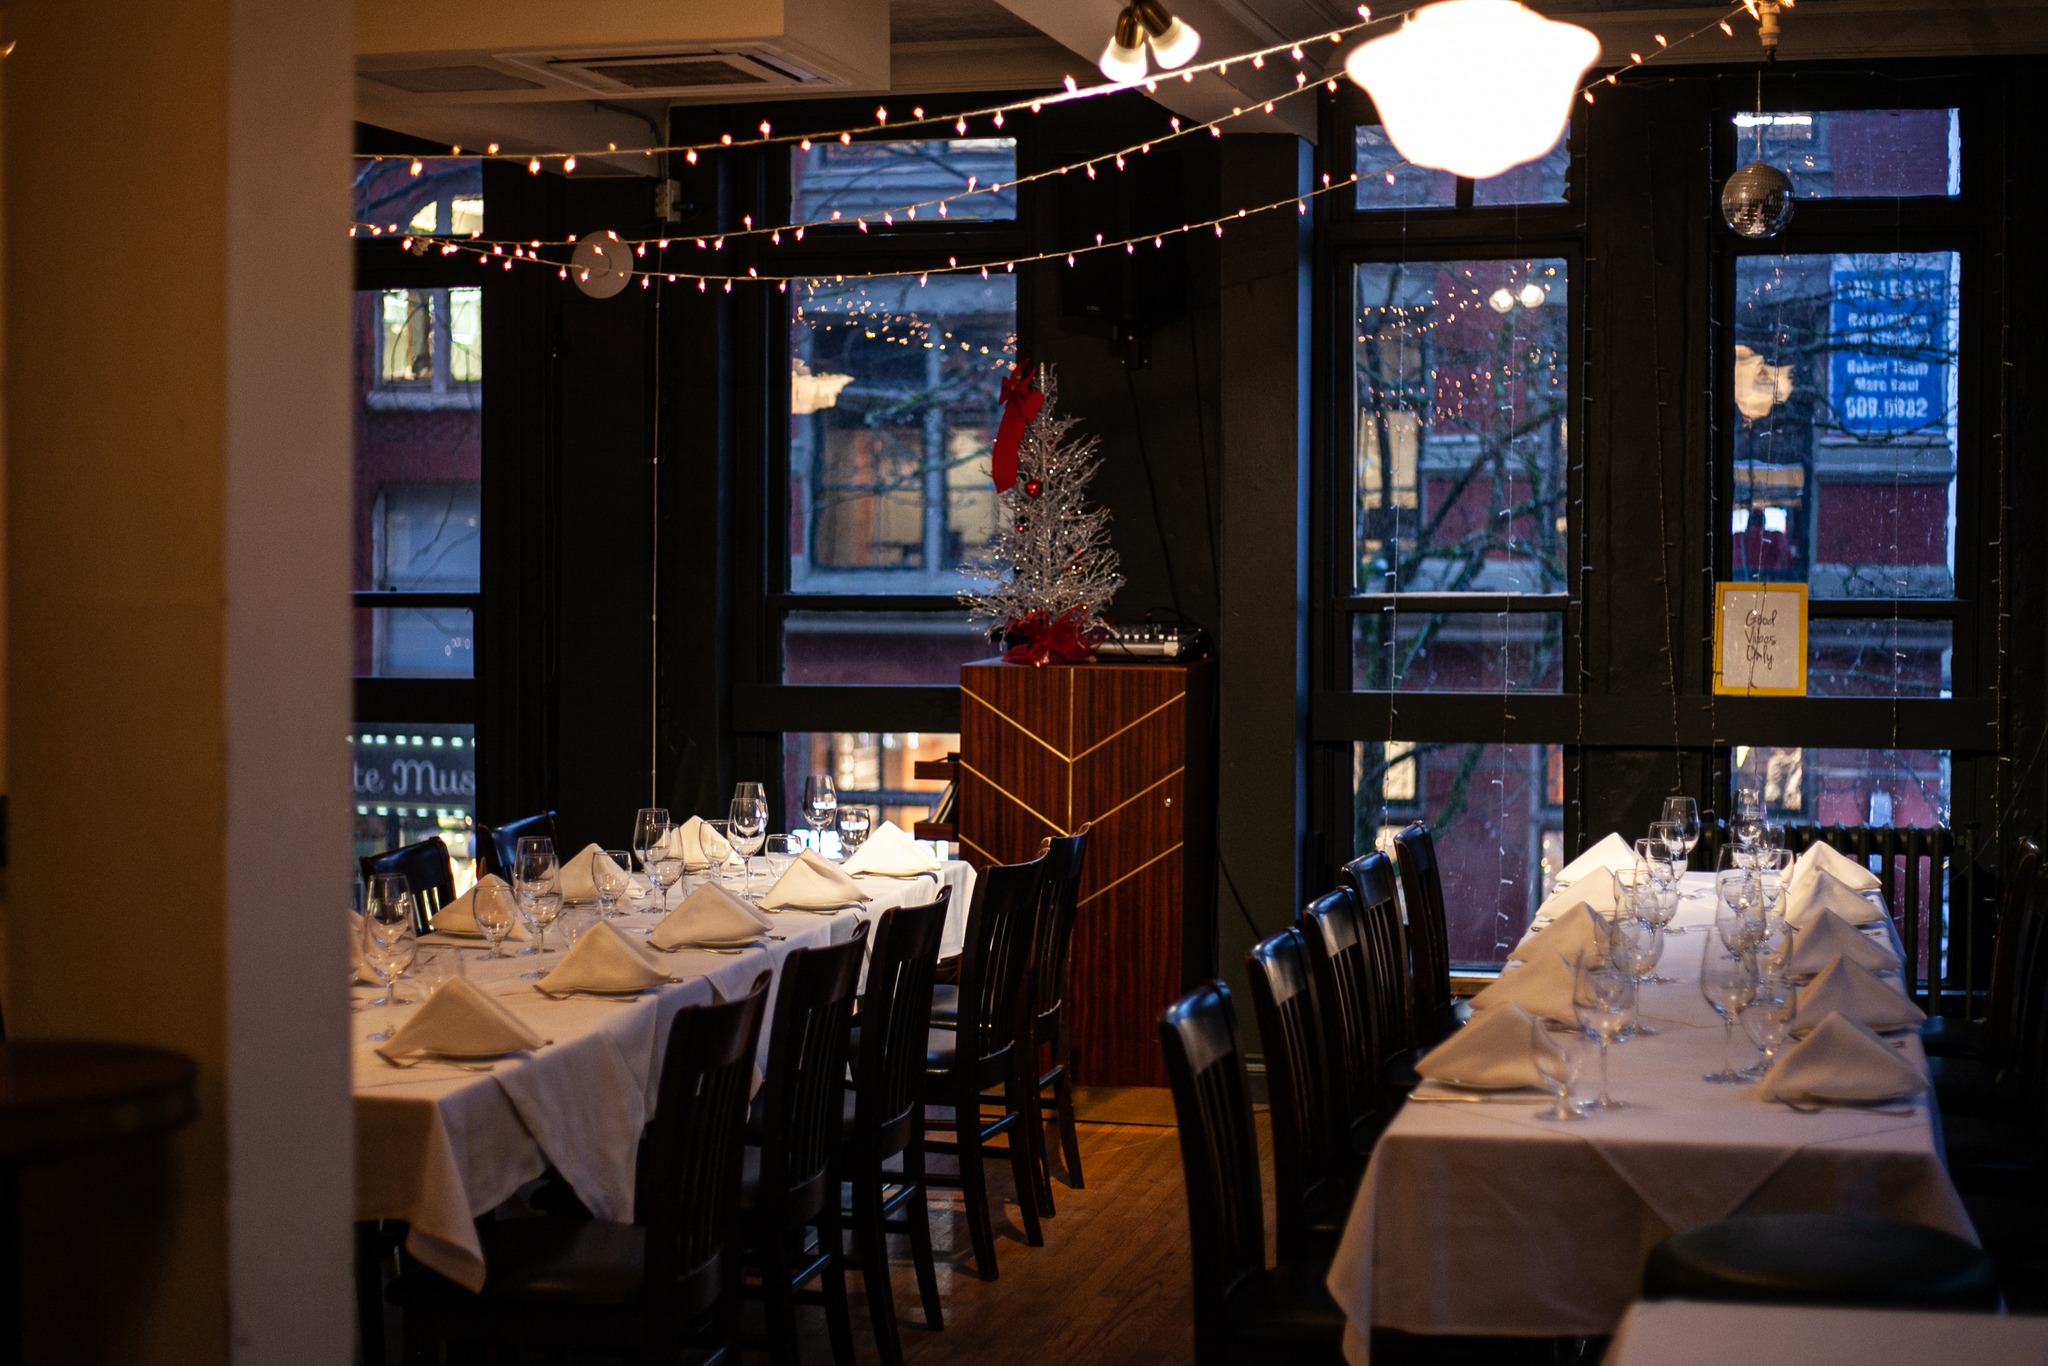 Fabulous New Year's Eve Dinner Options in Vancouver - Inside Vancouver  BlogInside Vancouver Blog